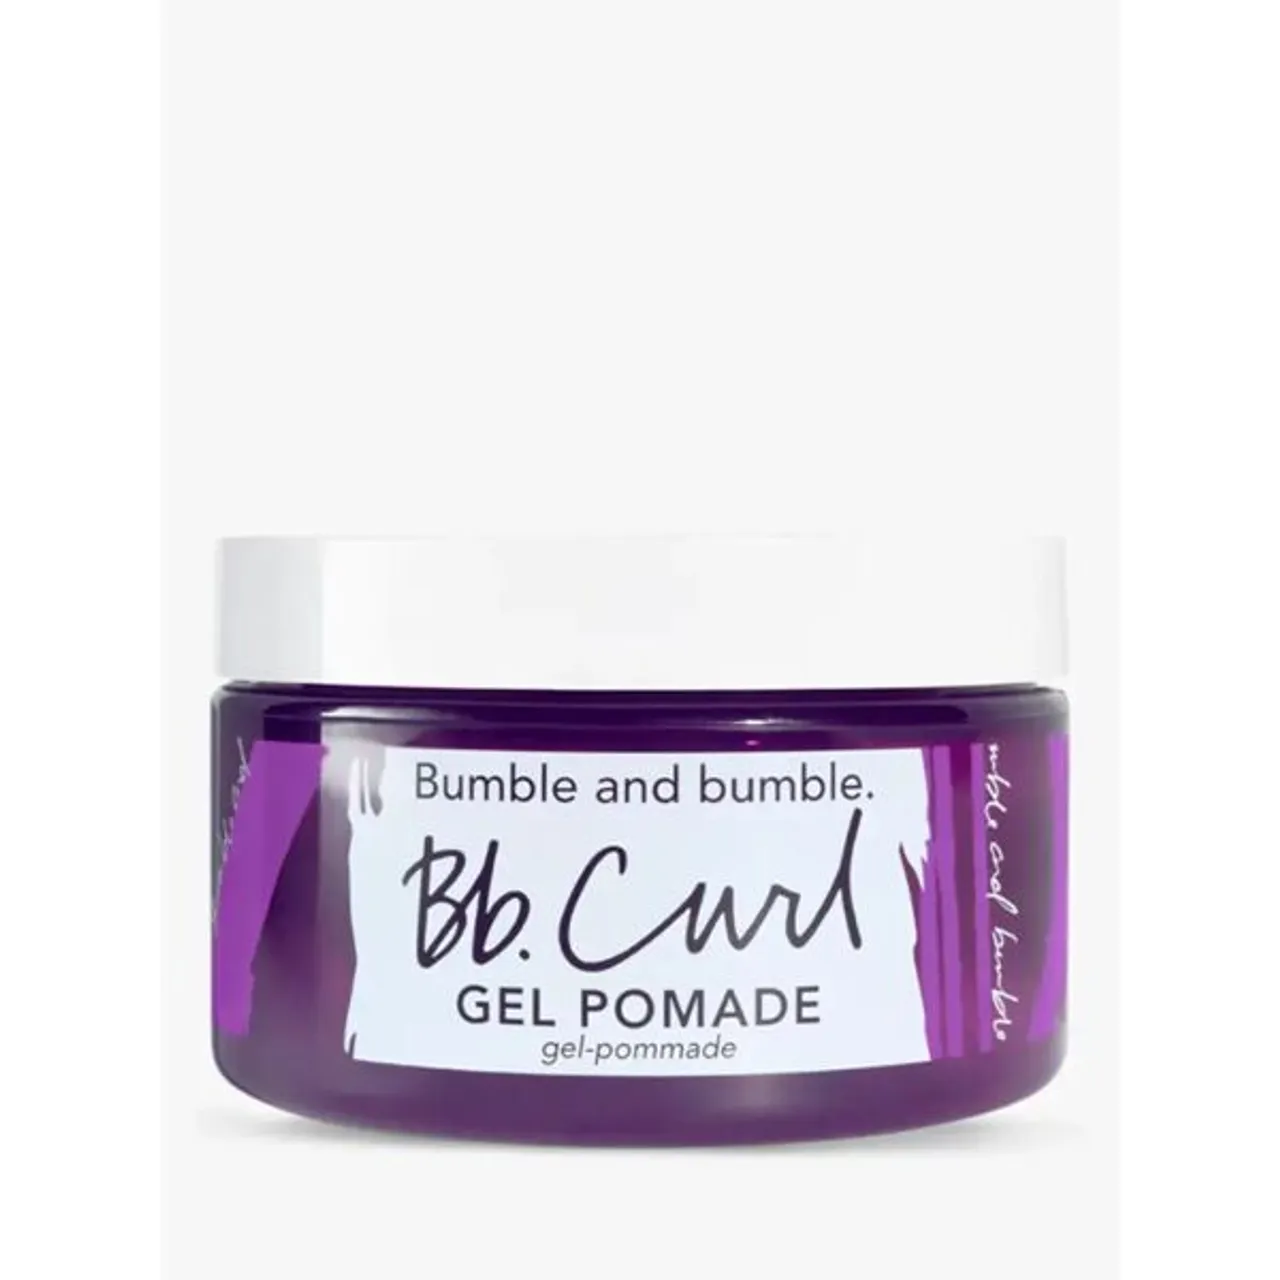 Bumble & Bumble Curl Gel Pomade, 100ml - Unisex